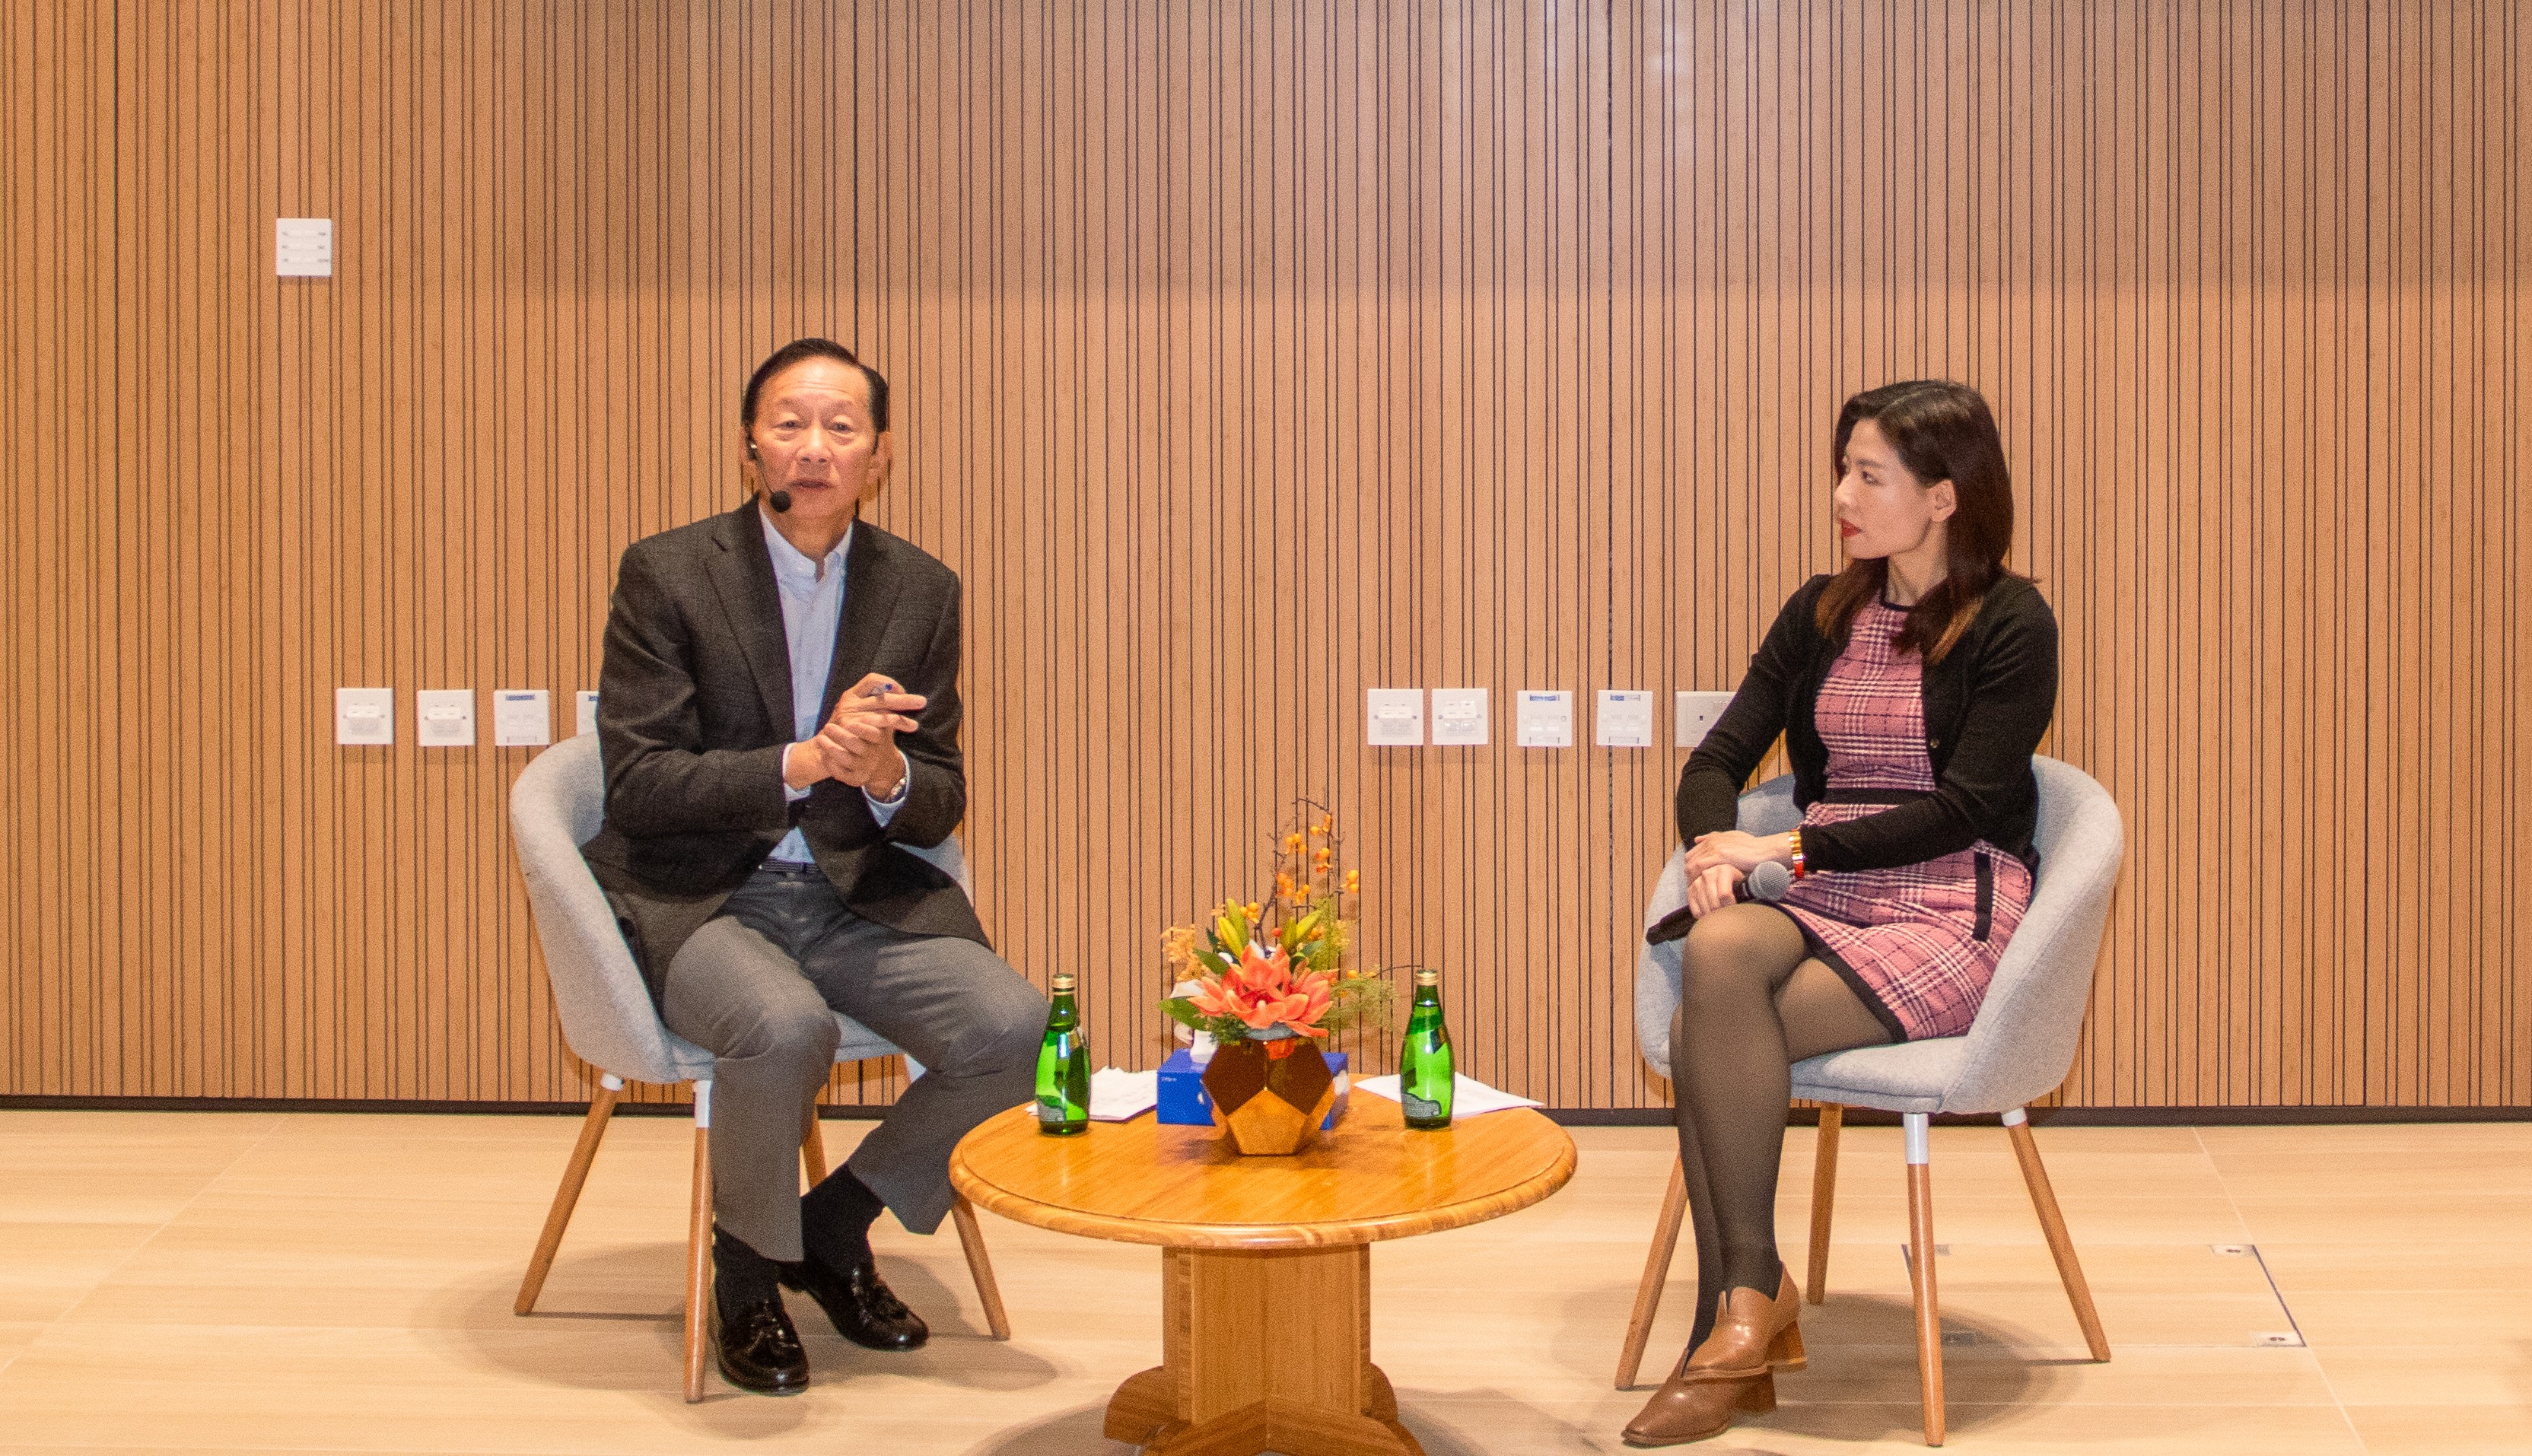 Honorary Doctor Peter Wong shares insights for thriving in globalised economy